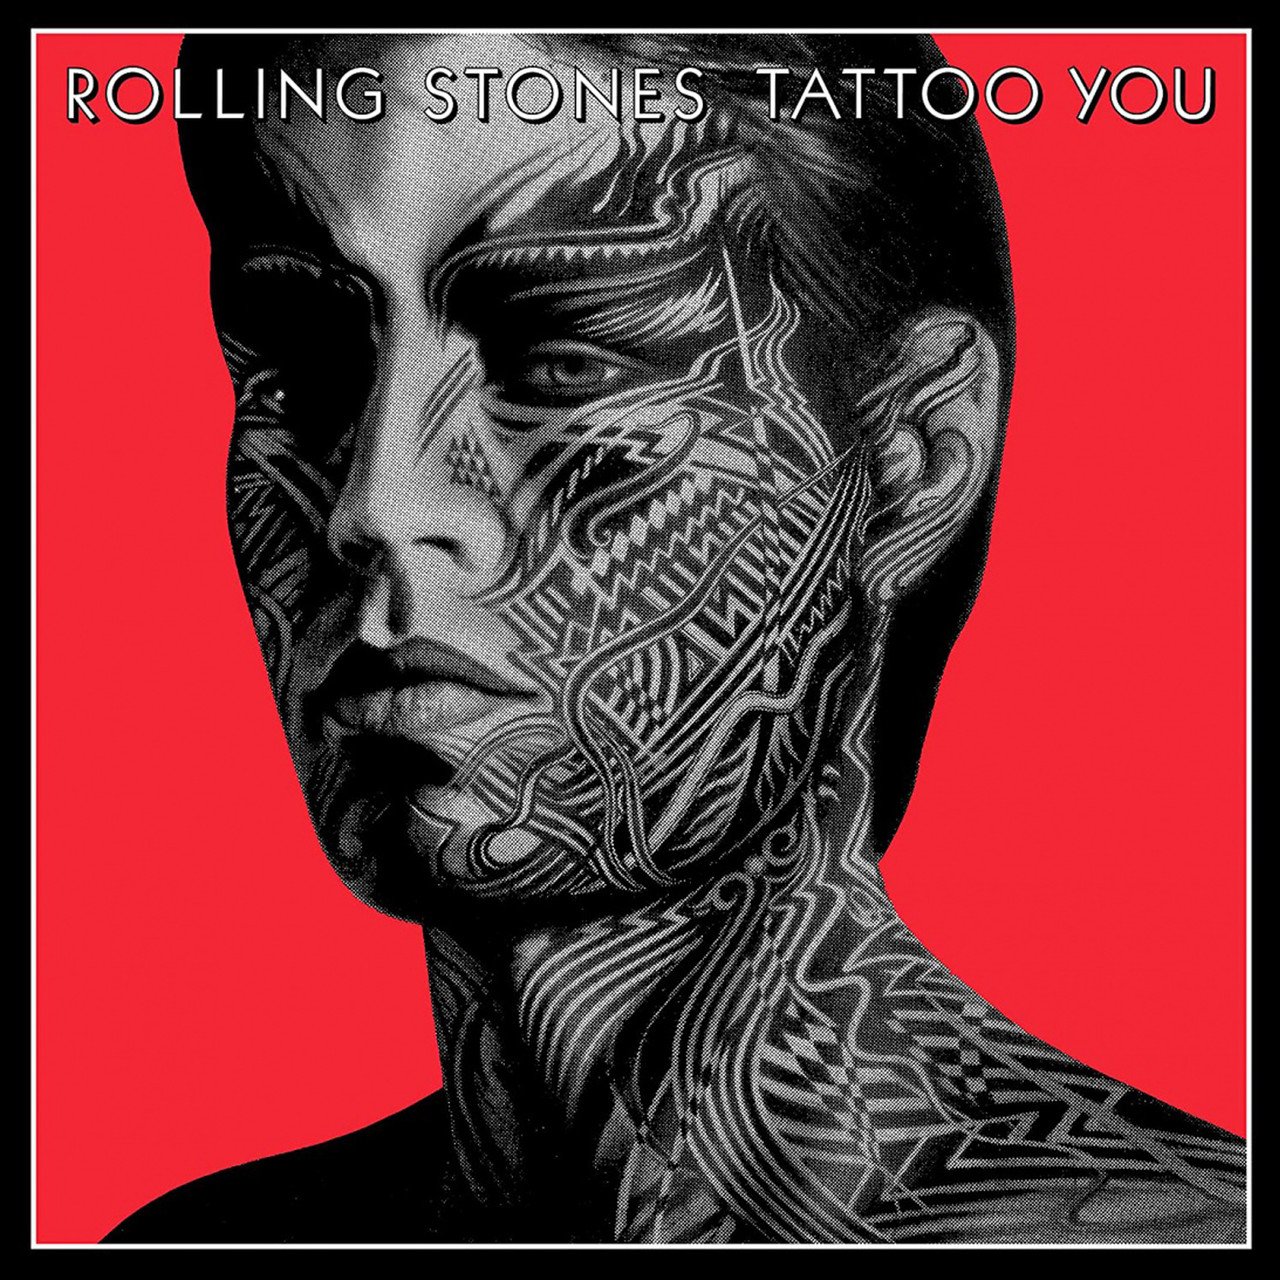 Рок Polydor UK The Rolling Stones - Tattoo You (Mick Jagger Sleeve) luxury makeup barber chairs tattoo vanity salon hairdressing chairs rolling swivel chaise coiffeuse barbershop furniture cm50lf